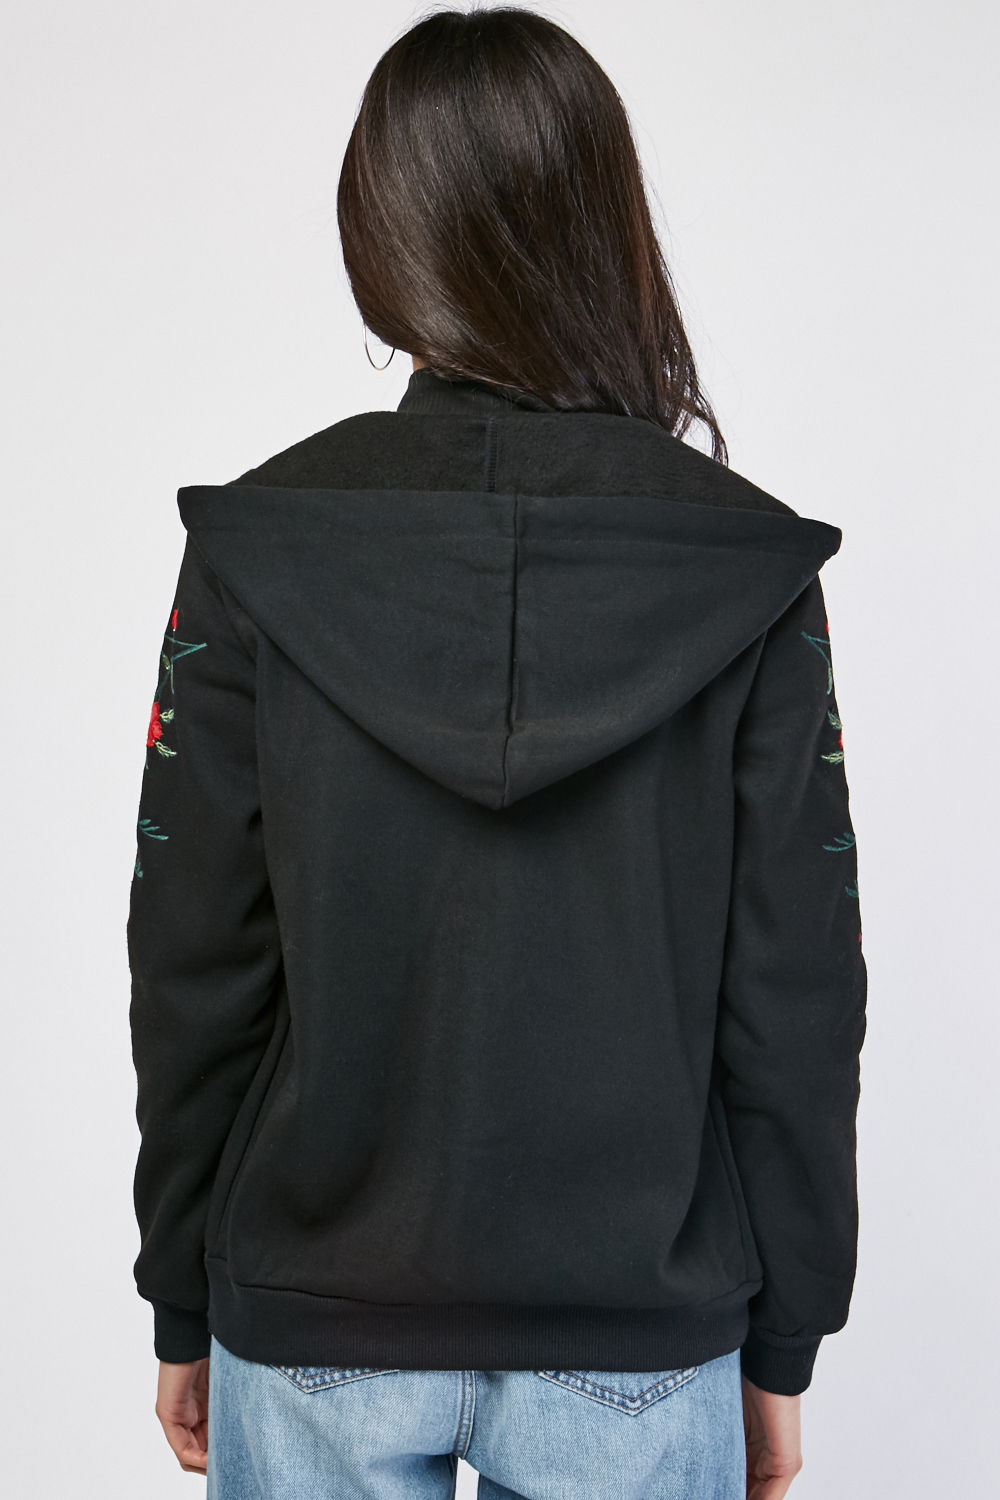 Embroidered Rose Hooded Jacket - Just $7